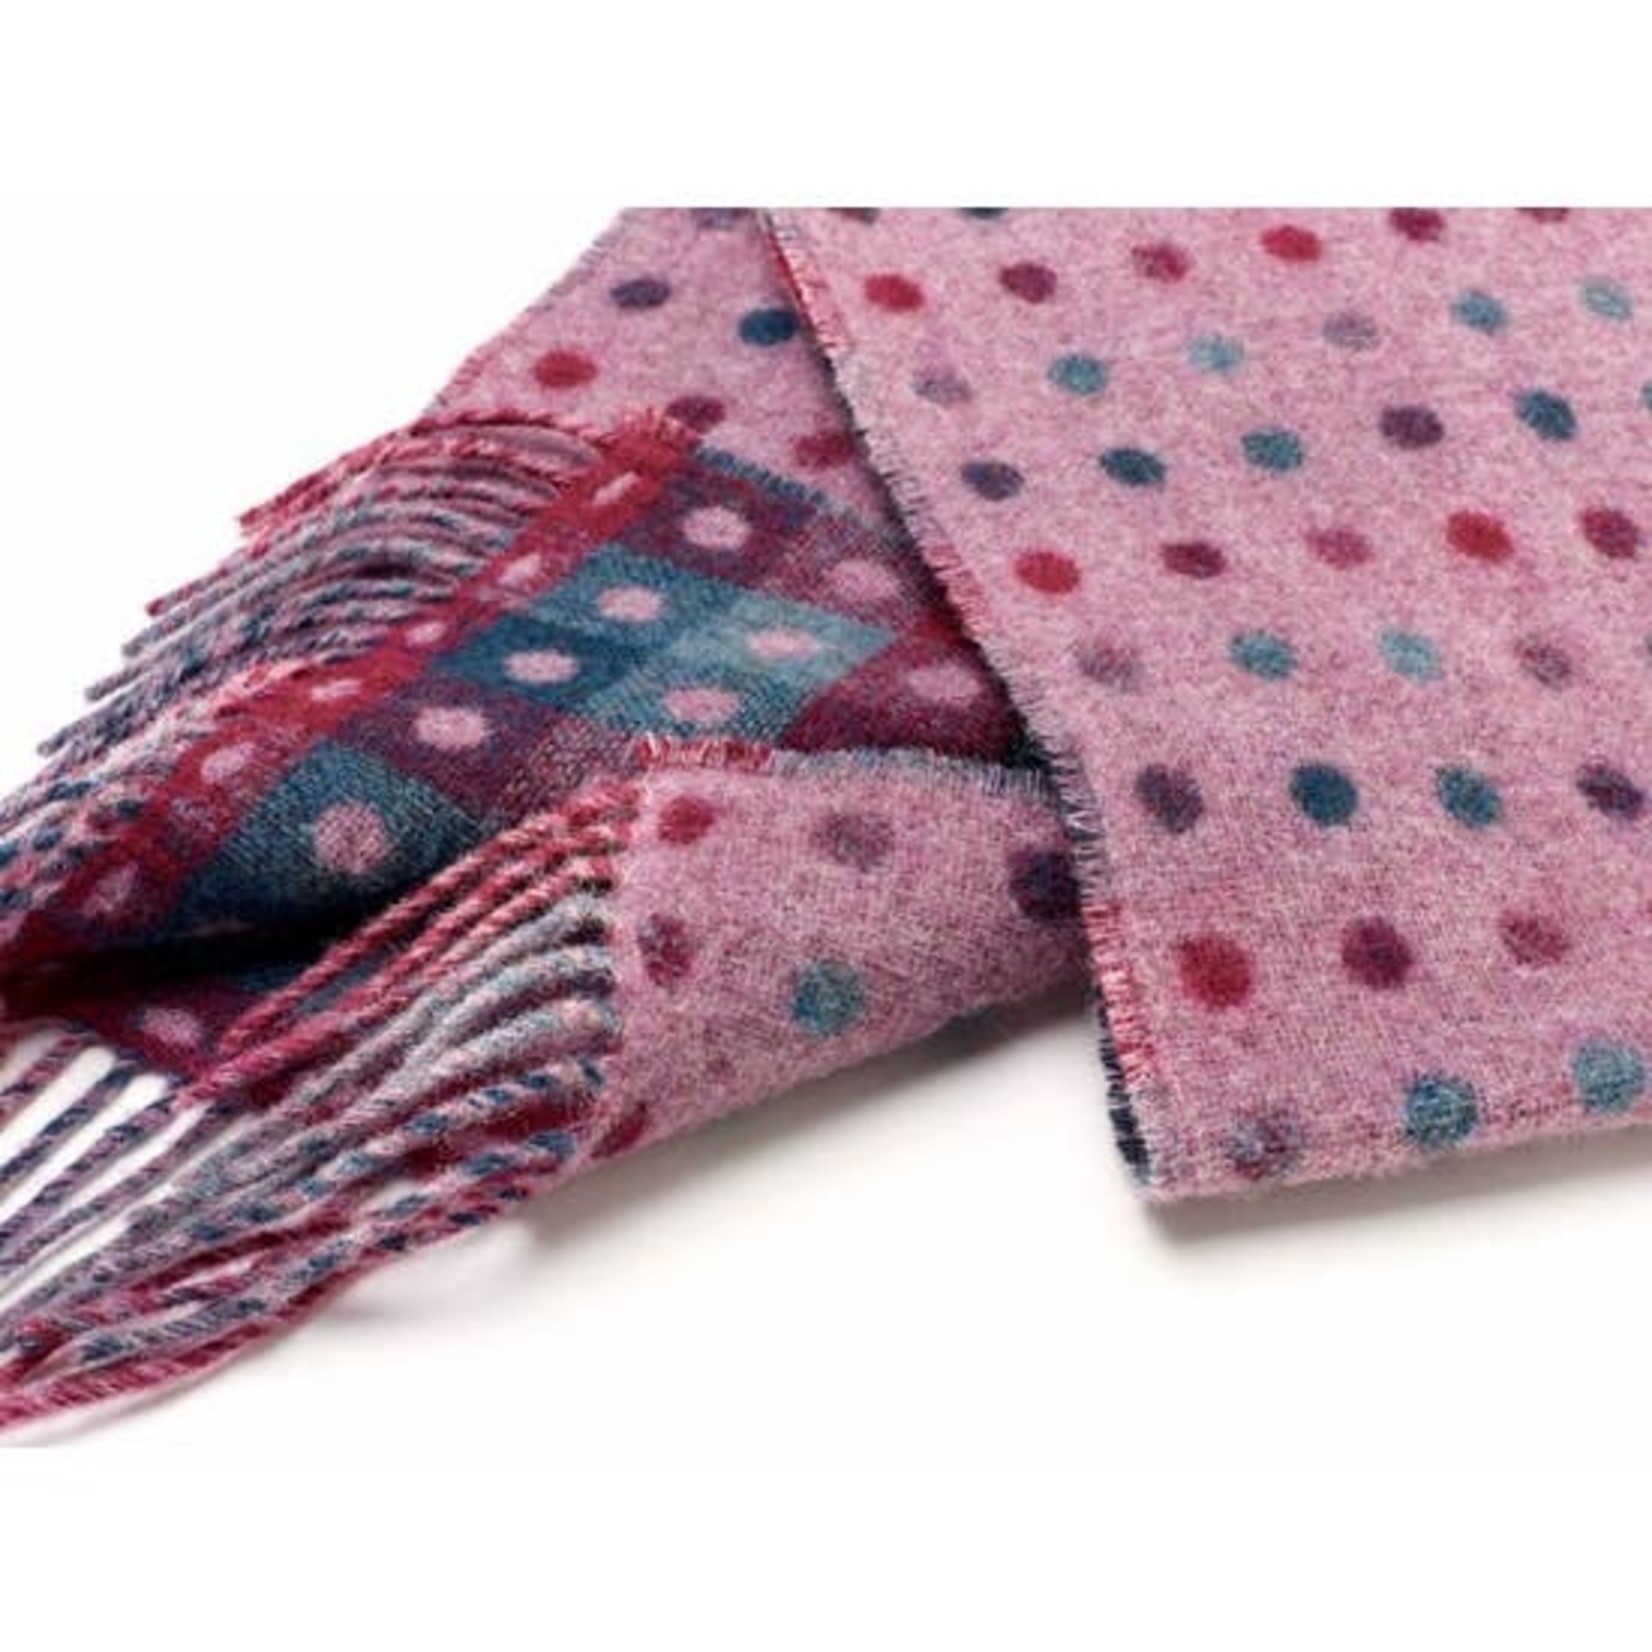 Spot Check Scarf - 100% Merino Lambswool - Made in England  Lilac Multi